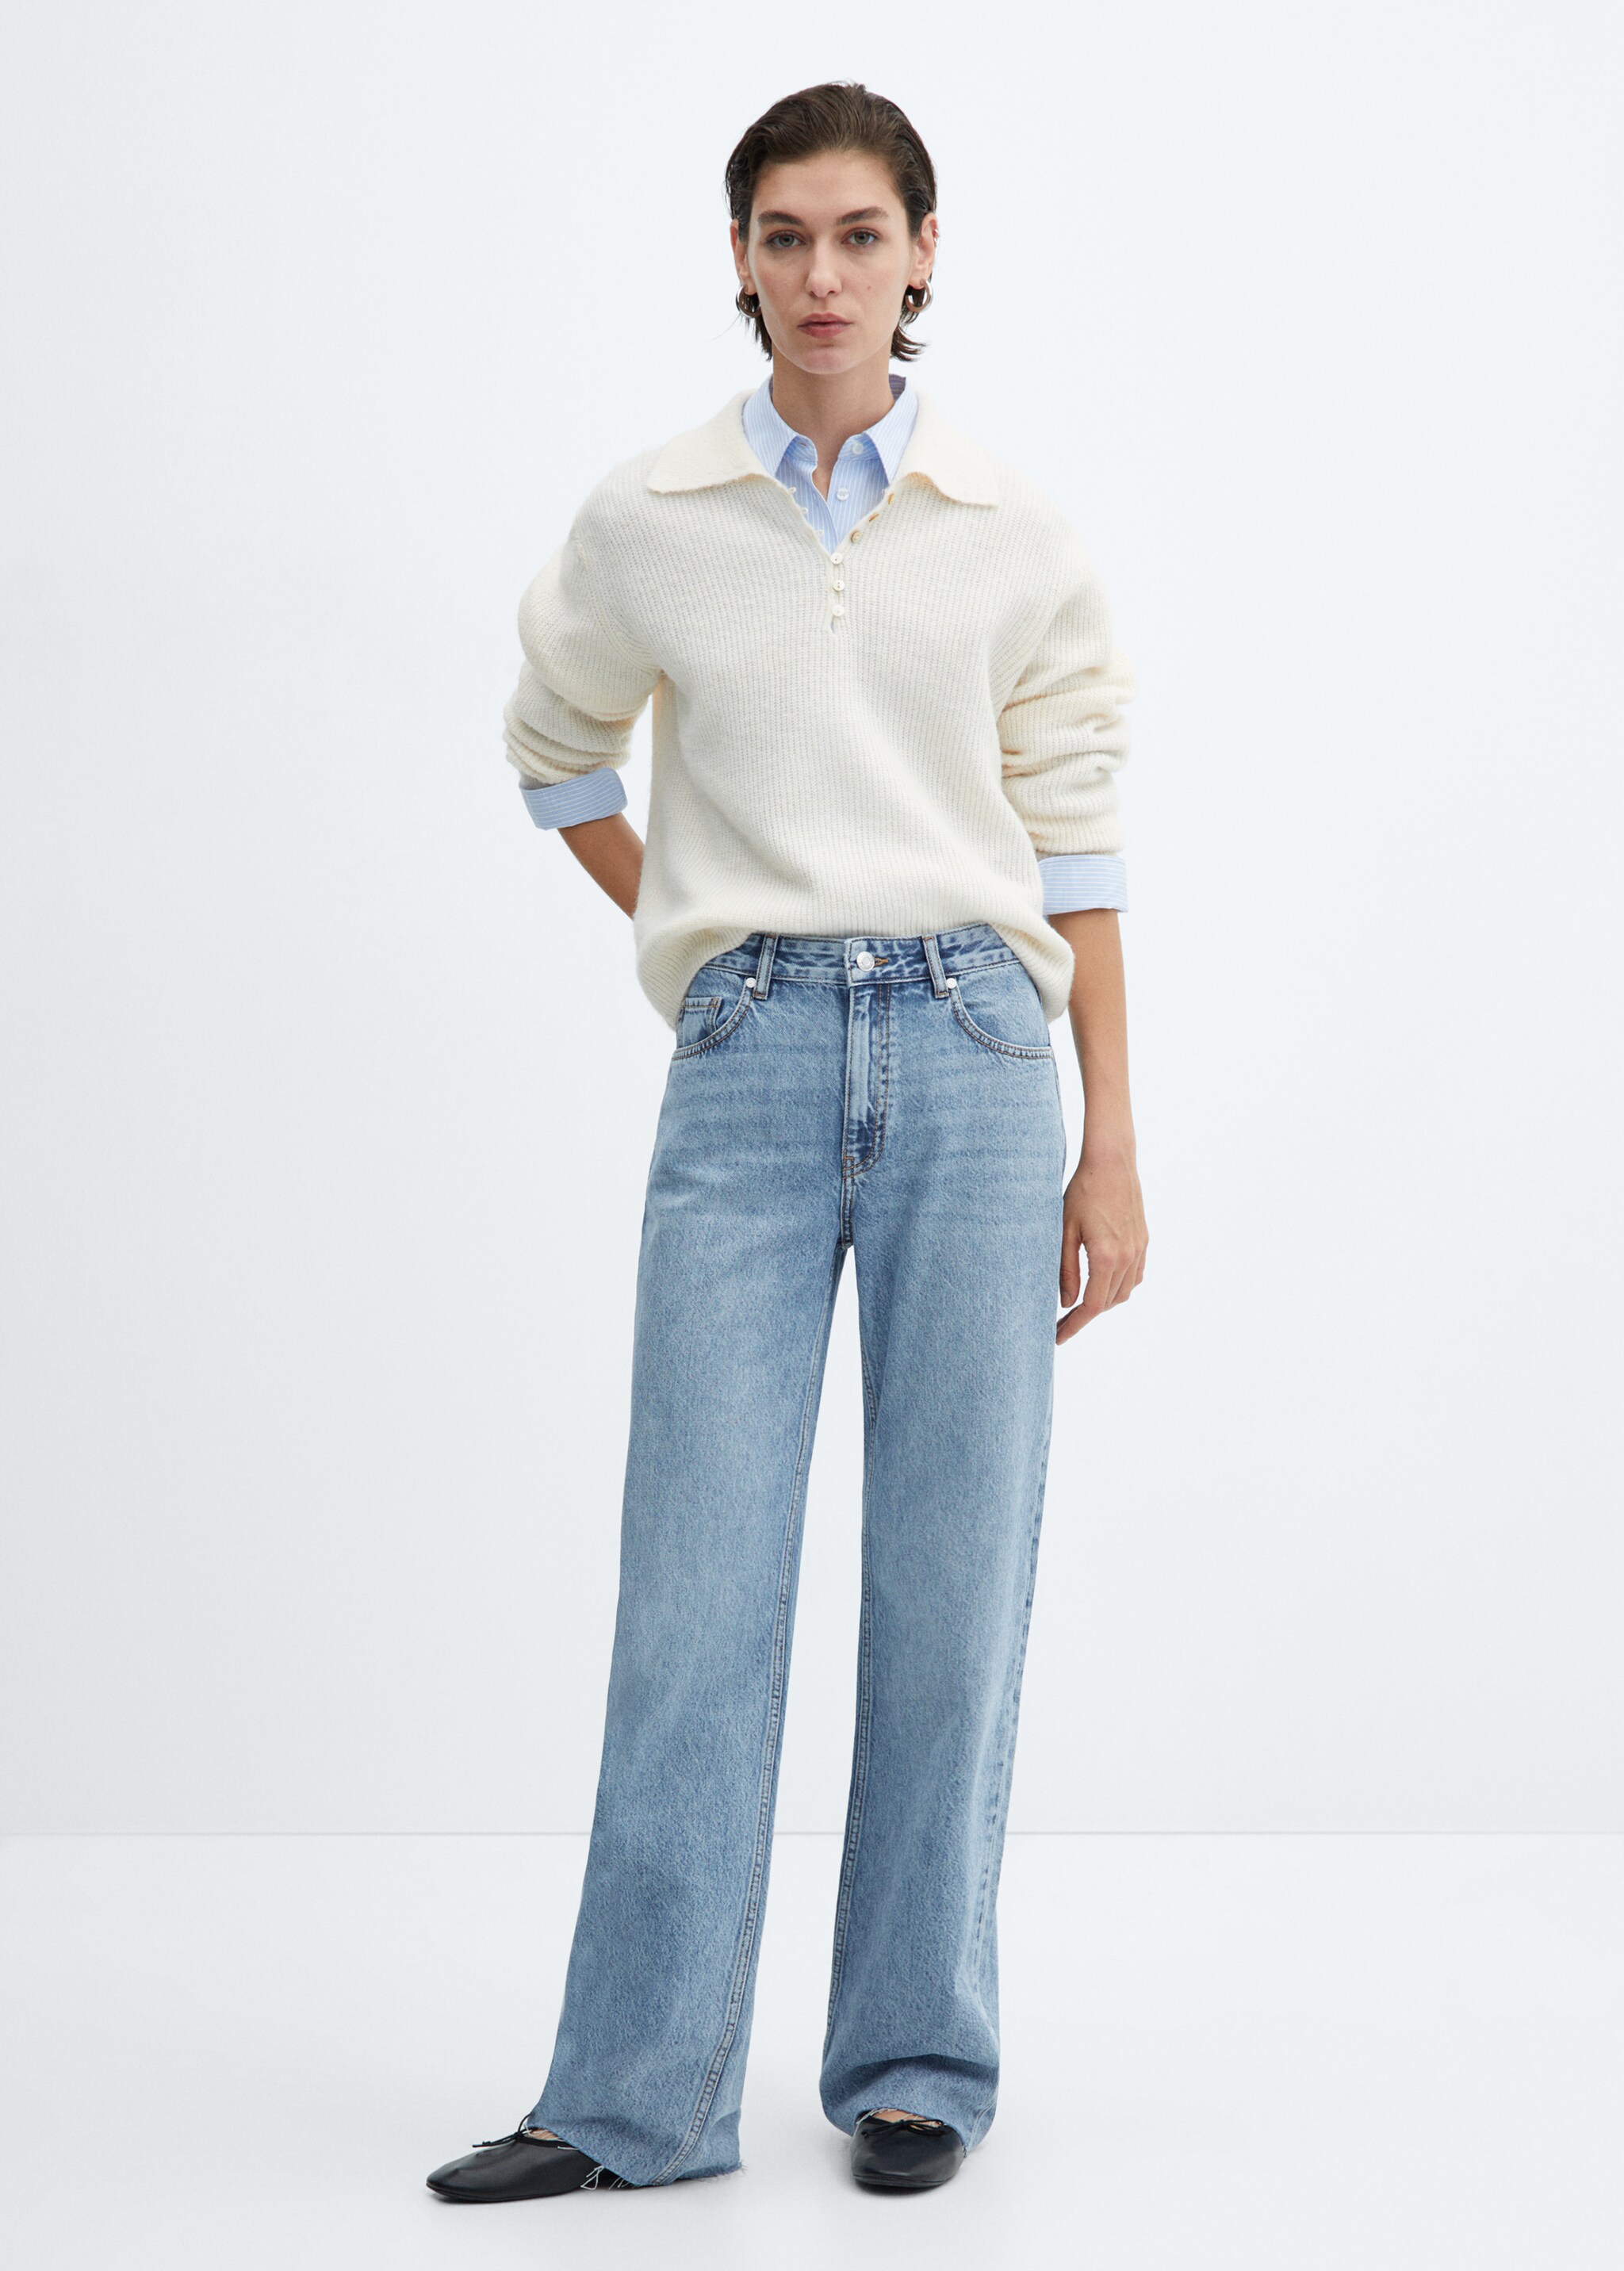 Wideleg mid-rise jeans - General plane